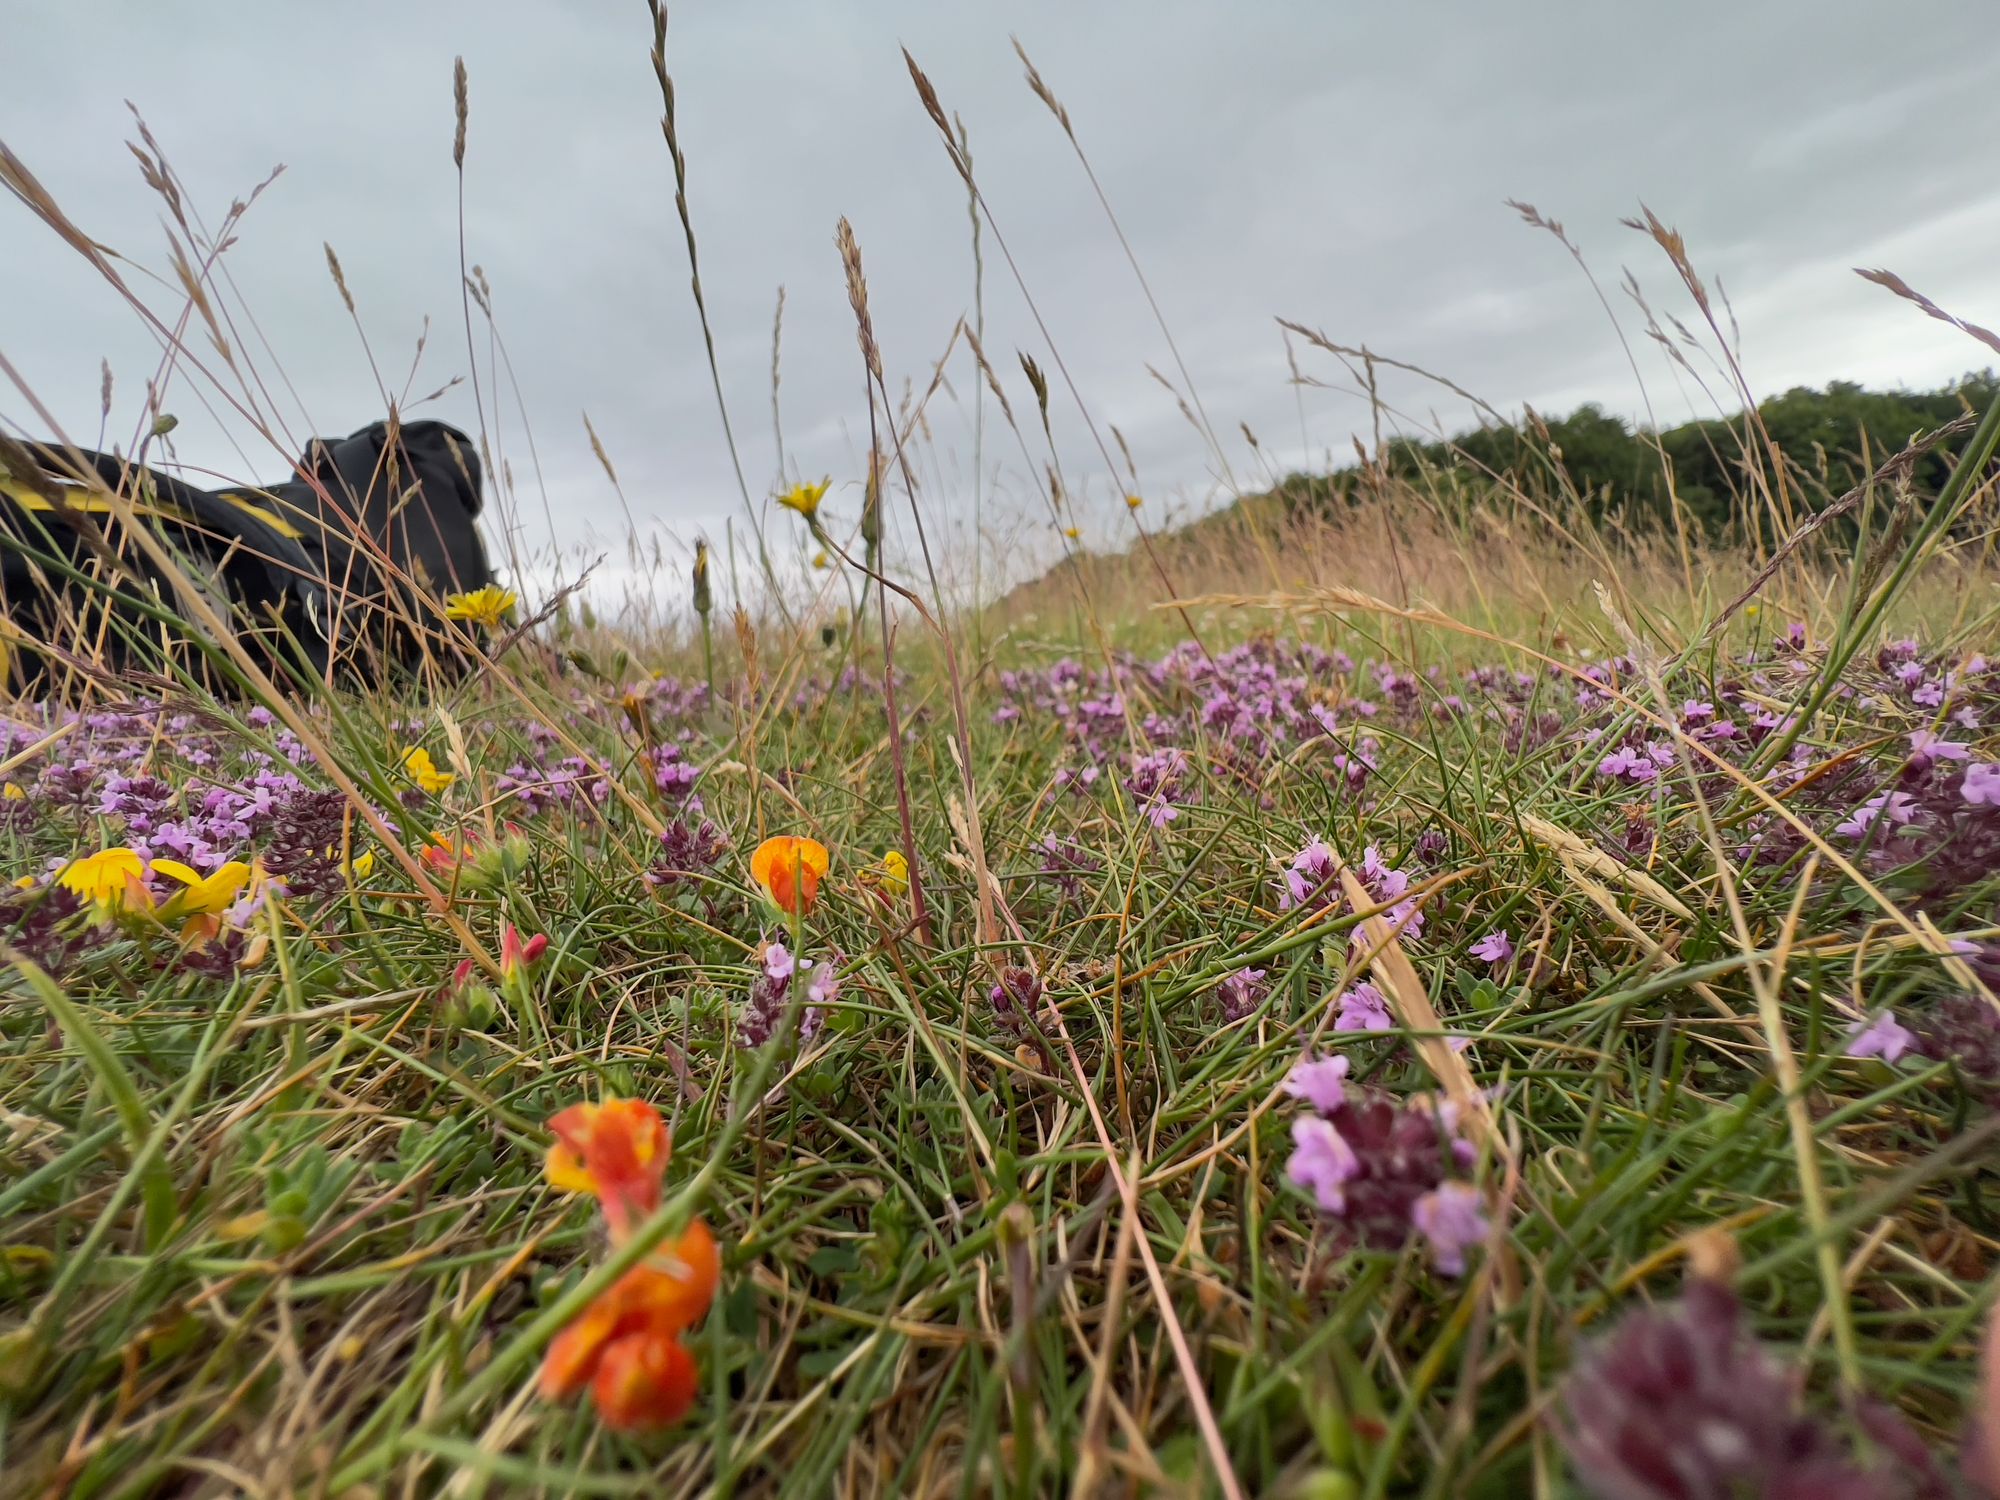 Tiny purple and orange flowers in a grassy meadow on a hill.